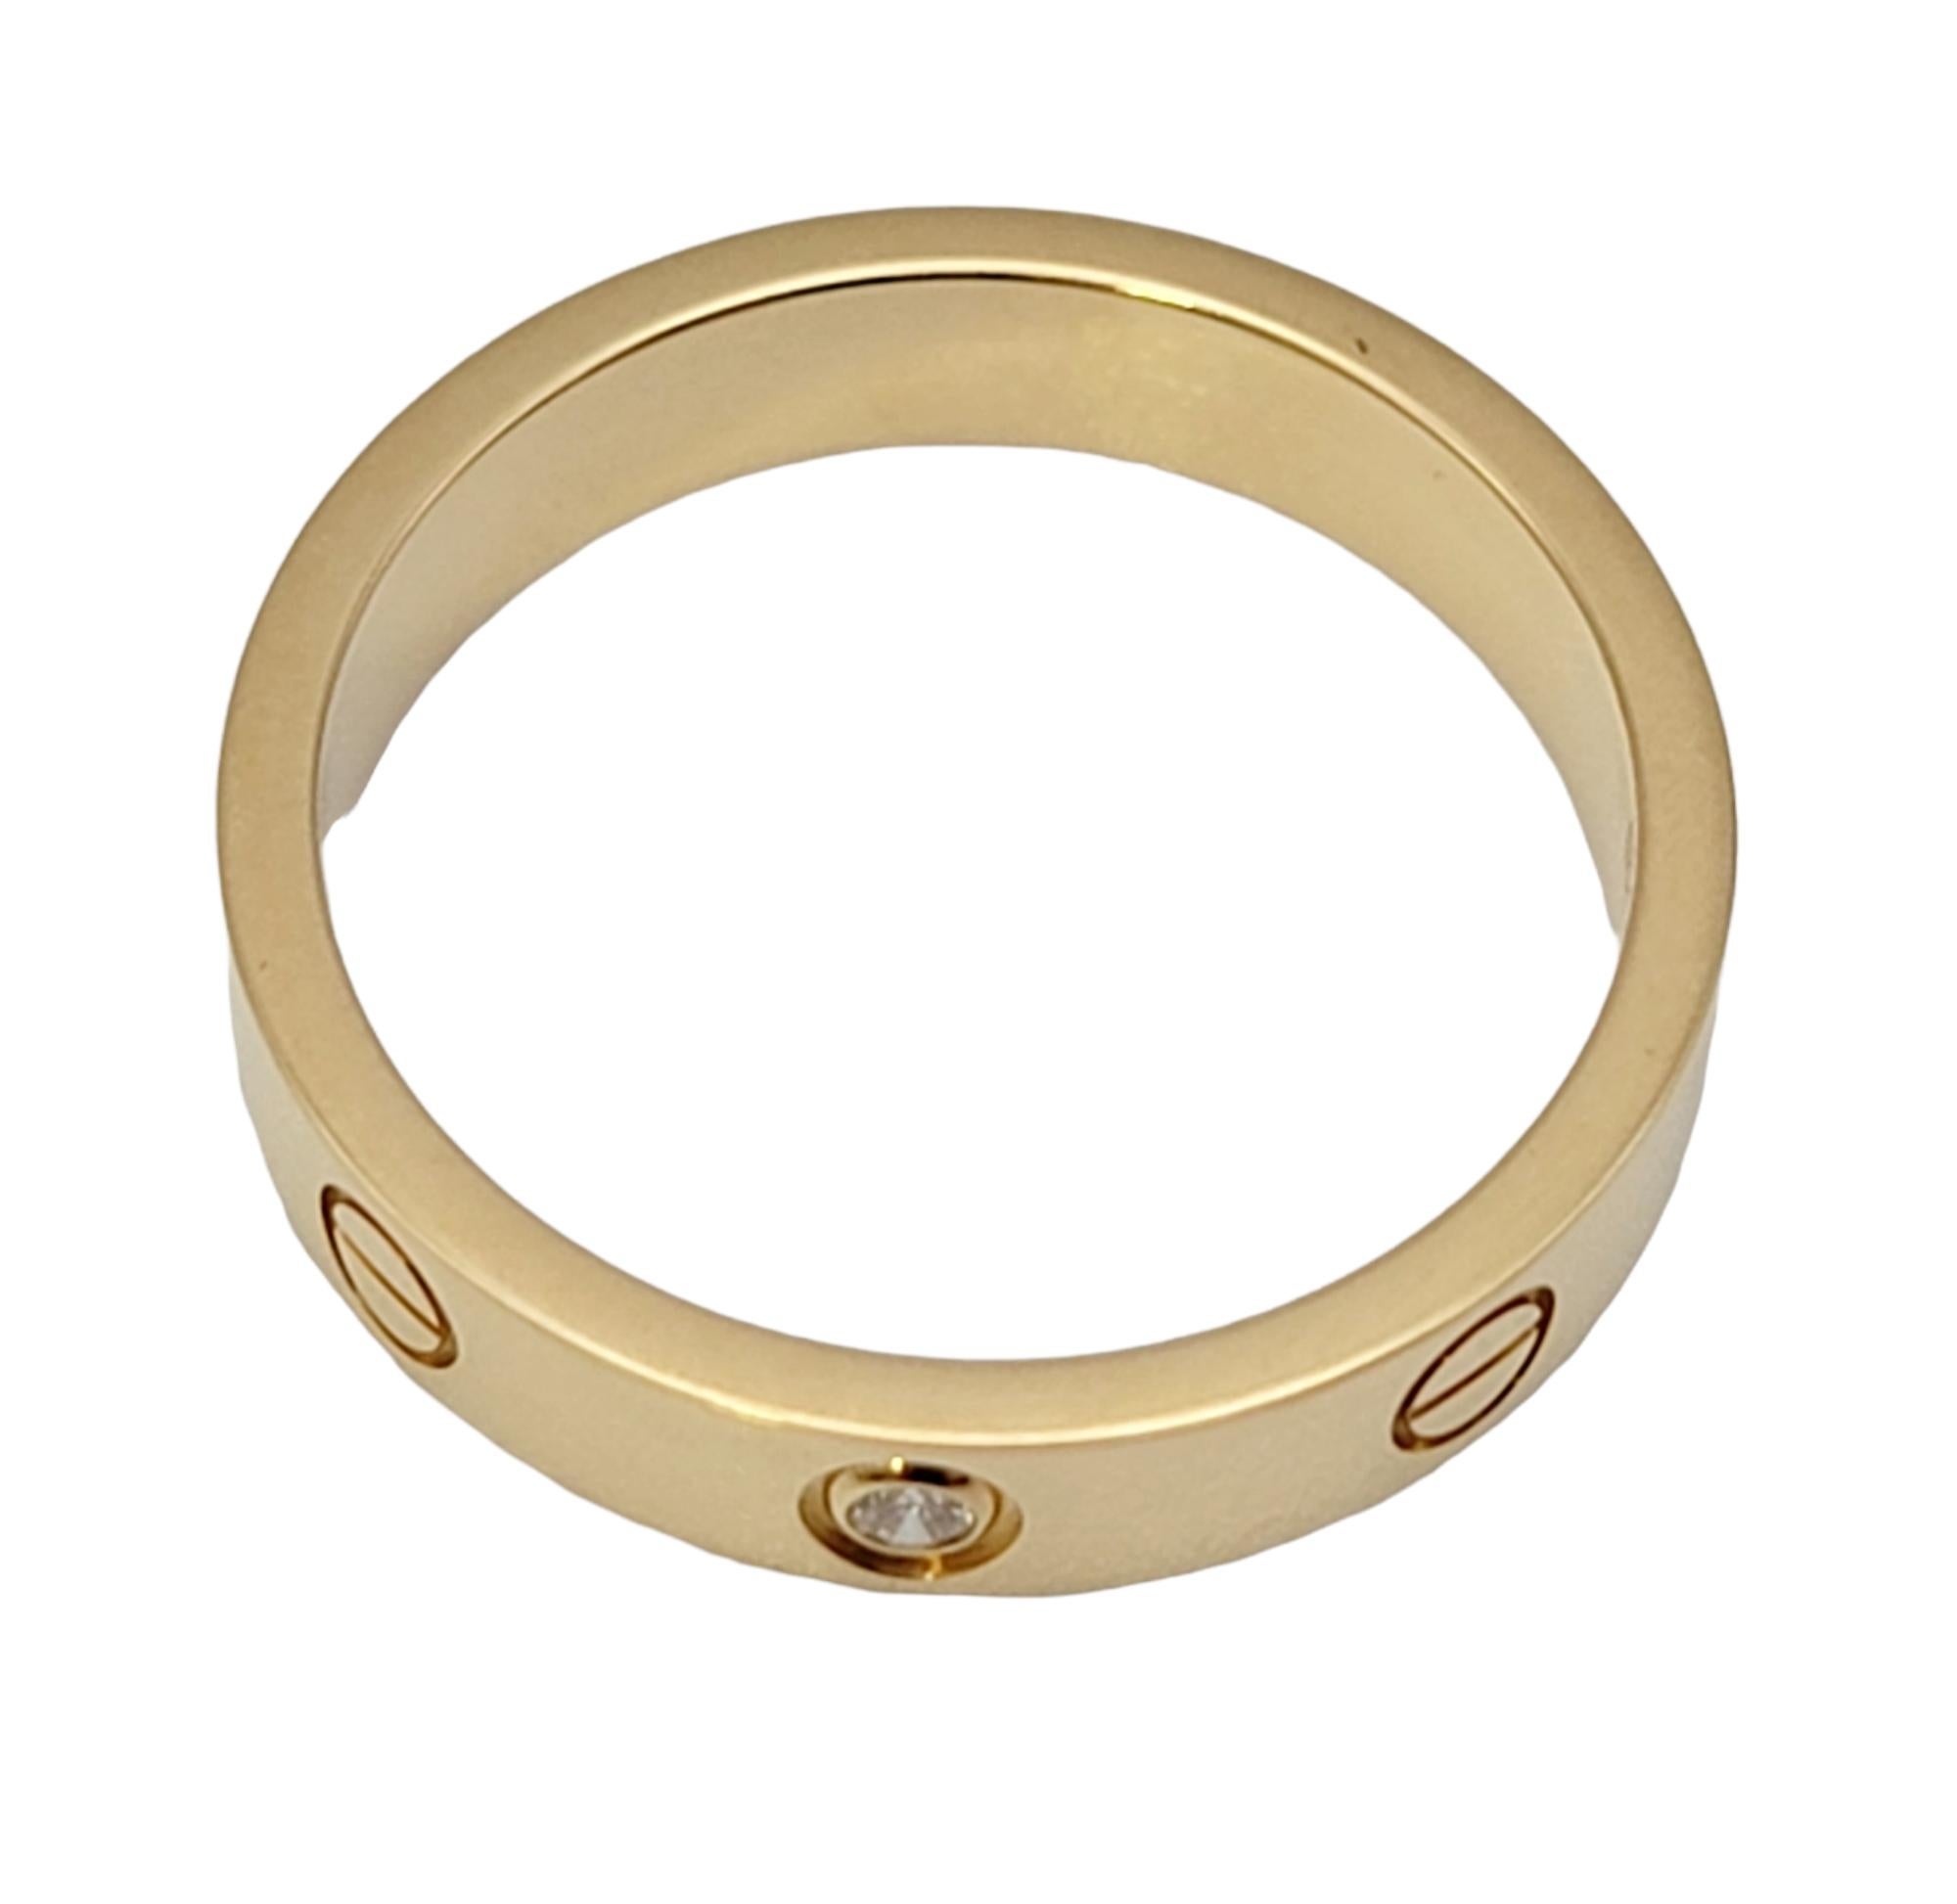 Round Cut Cartier Love Collection 18 Karat Yellow Gold Wedding Band Ring with Diamond, Box